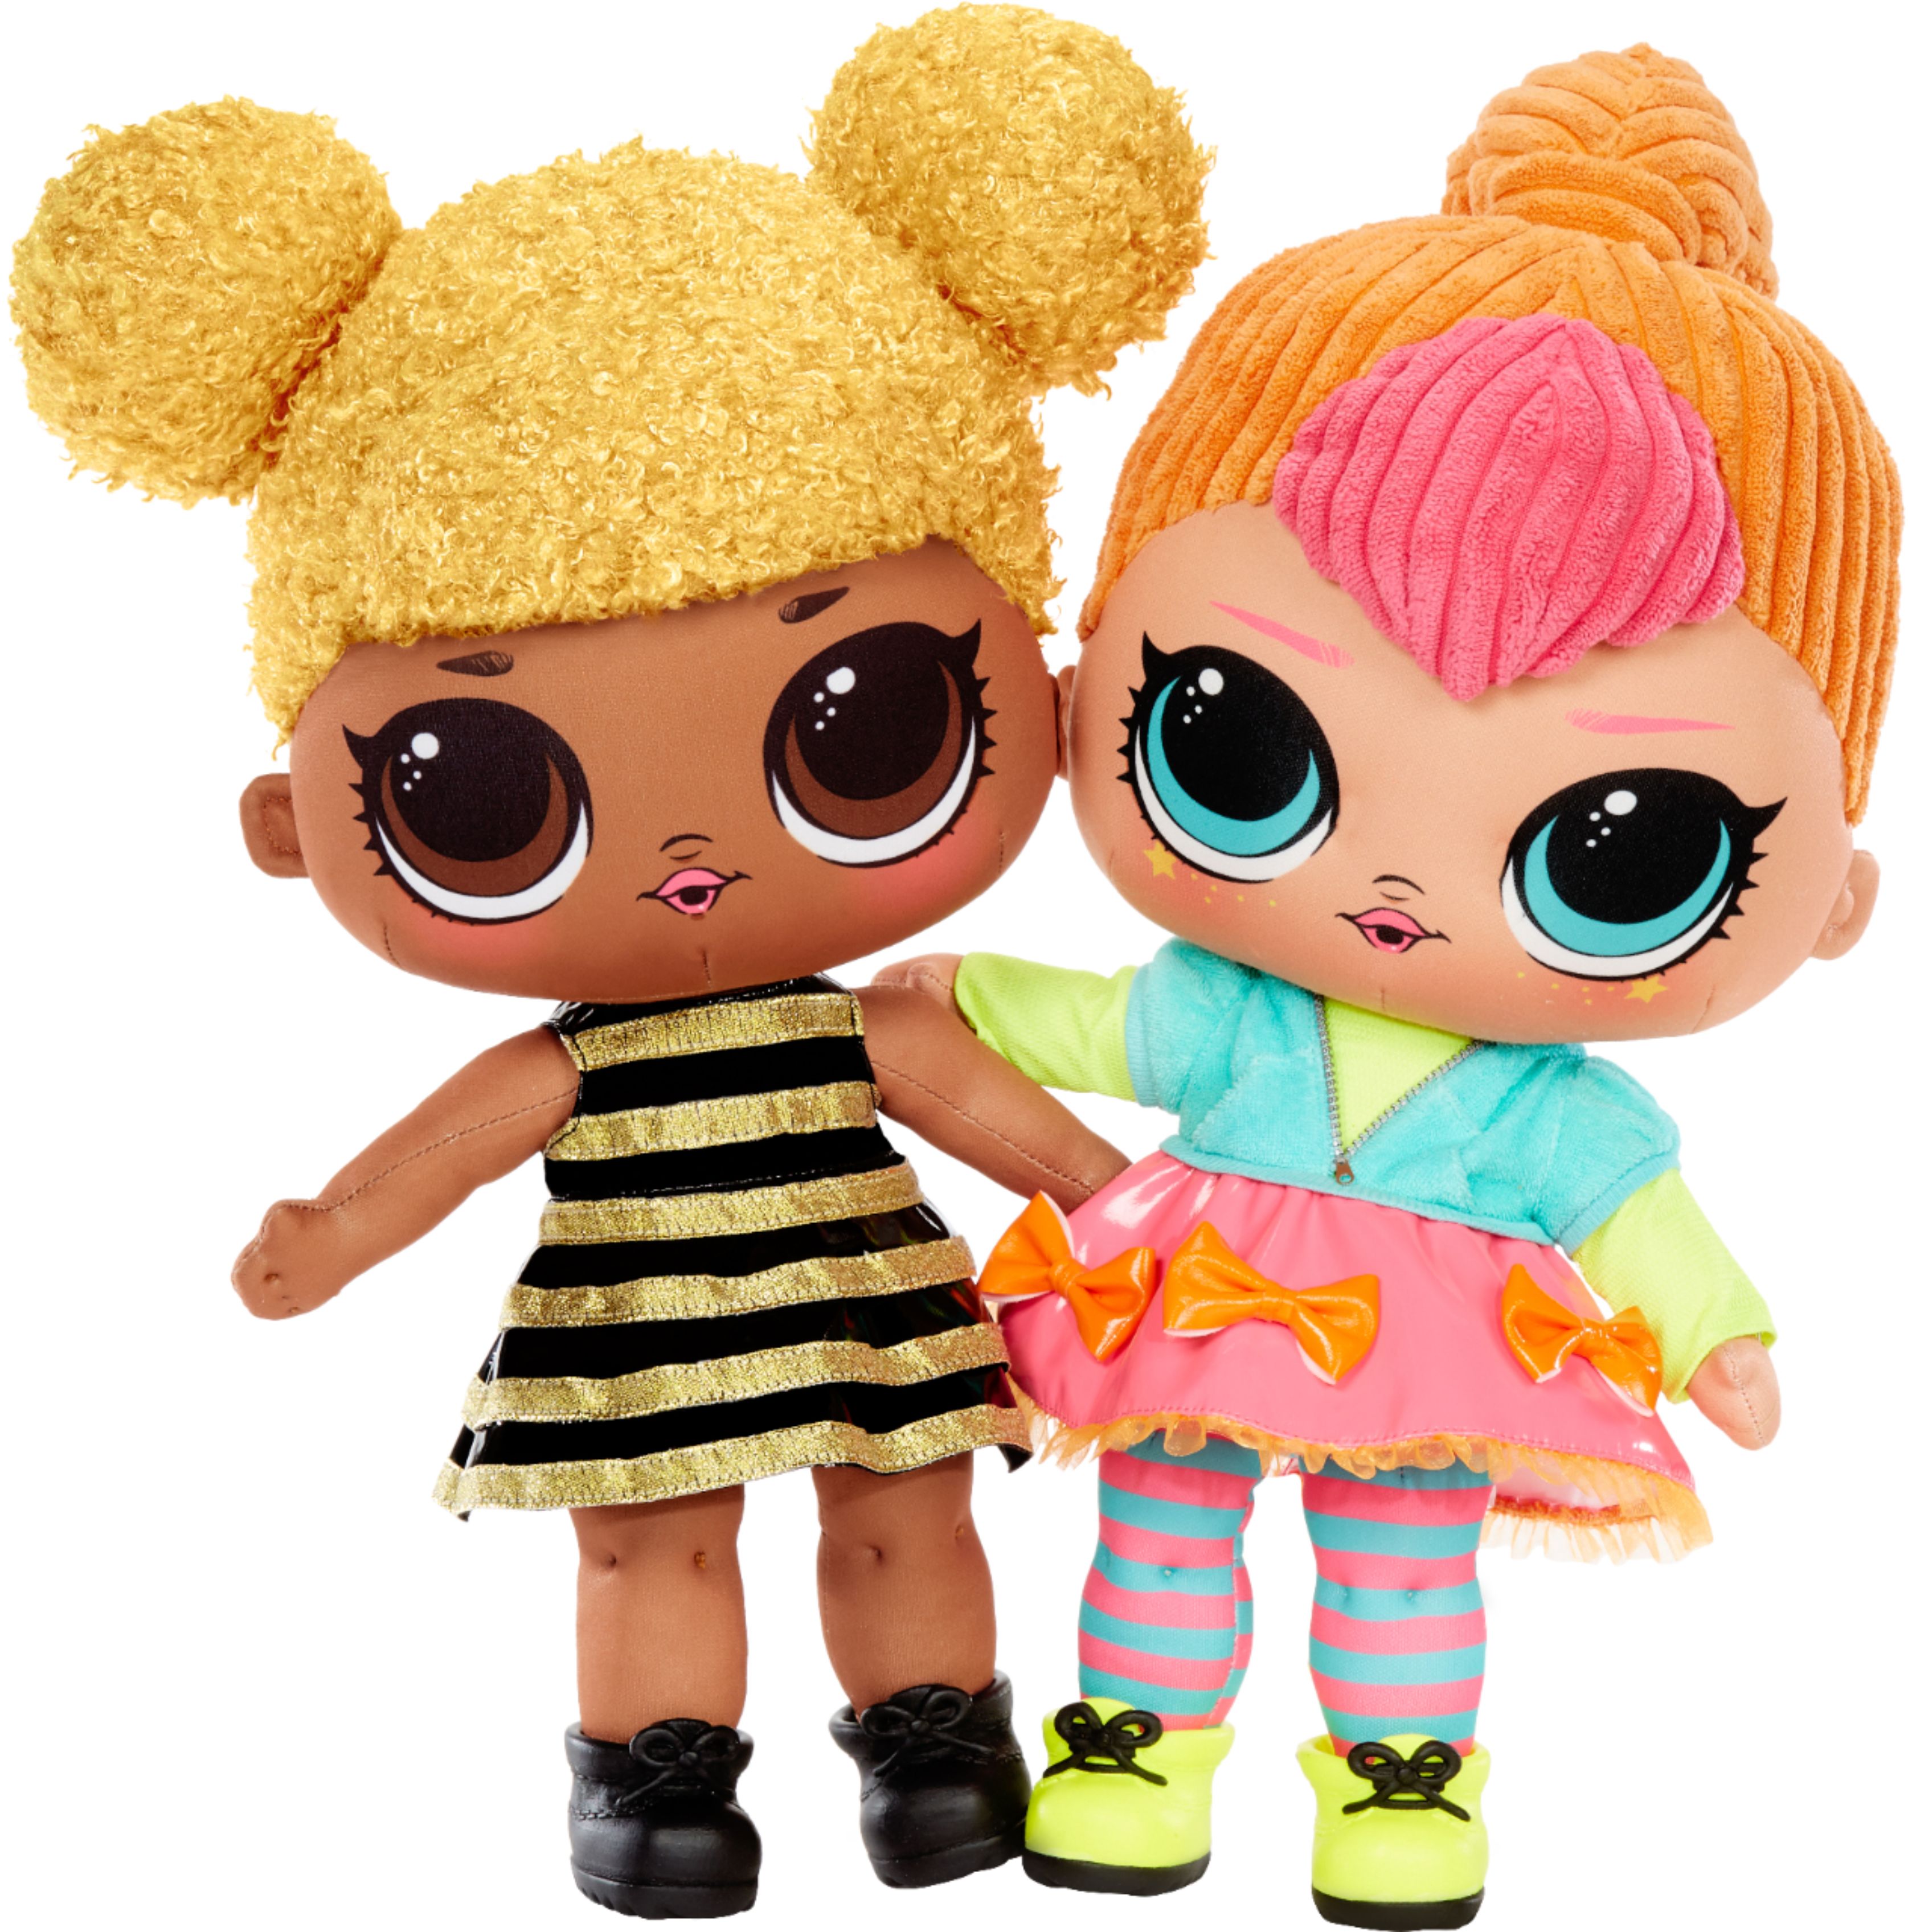 Surprise Queen Bee Plush Doll MGA Entertainment L.O.L 571292 for sale online 